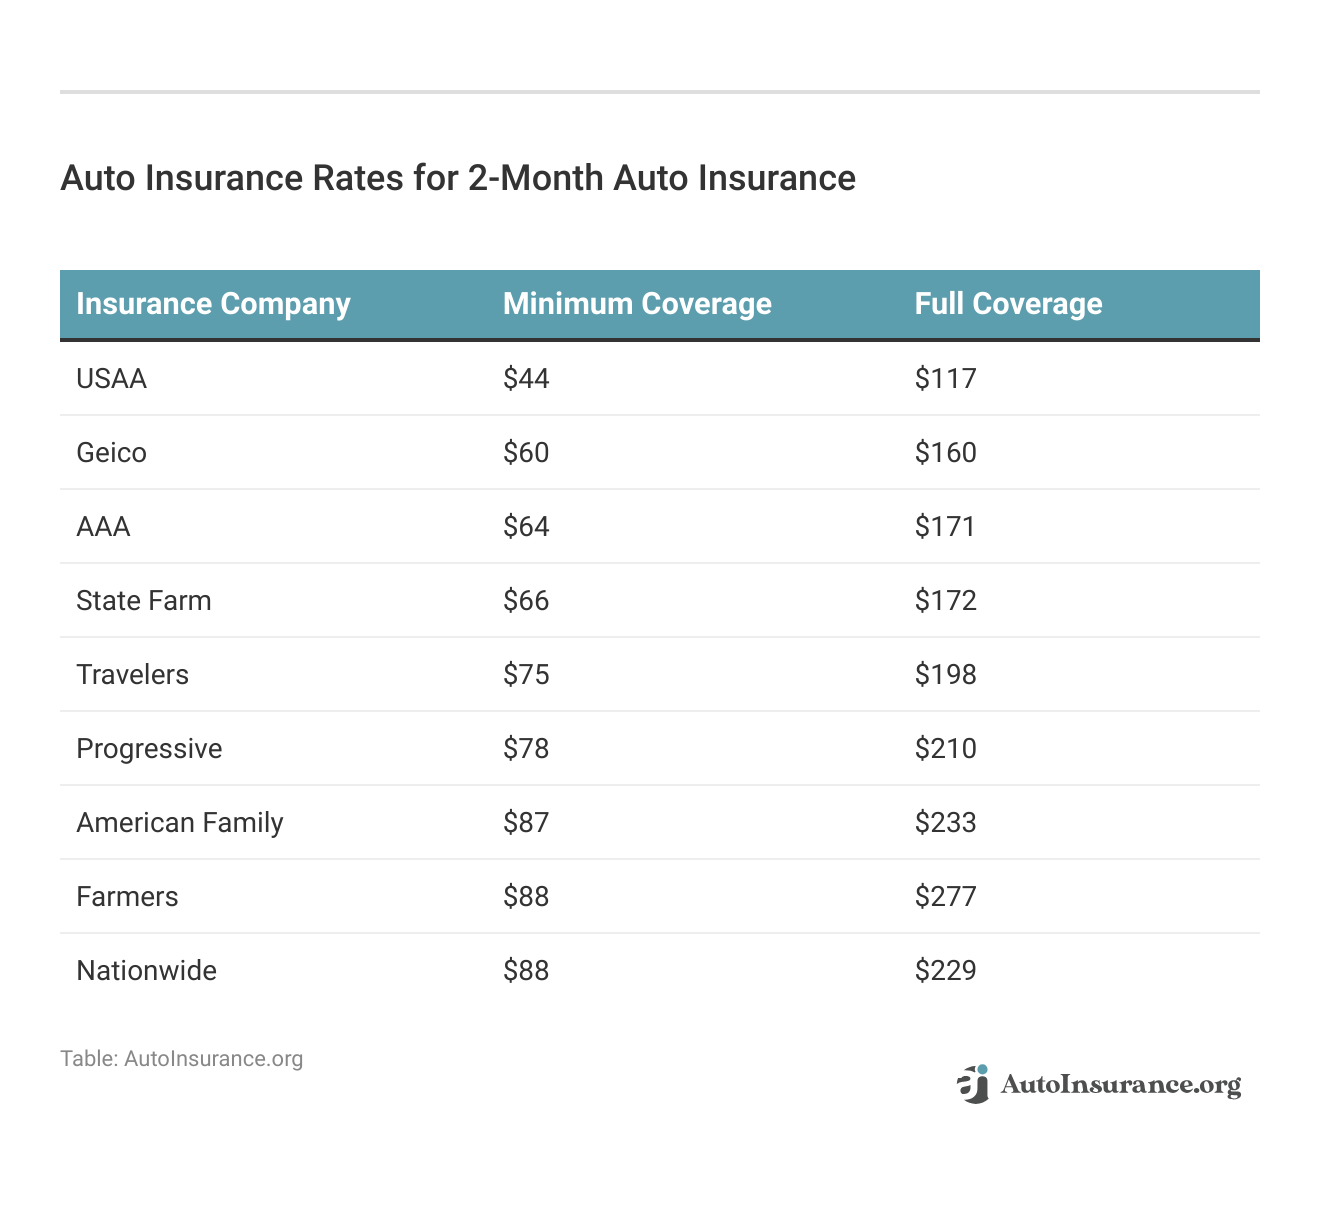 <h3>Auto Insurance Rates for 2-Month Auto Insurance</h3>